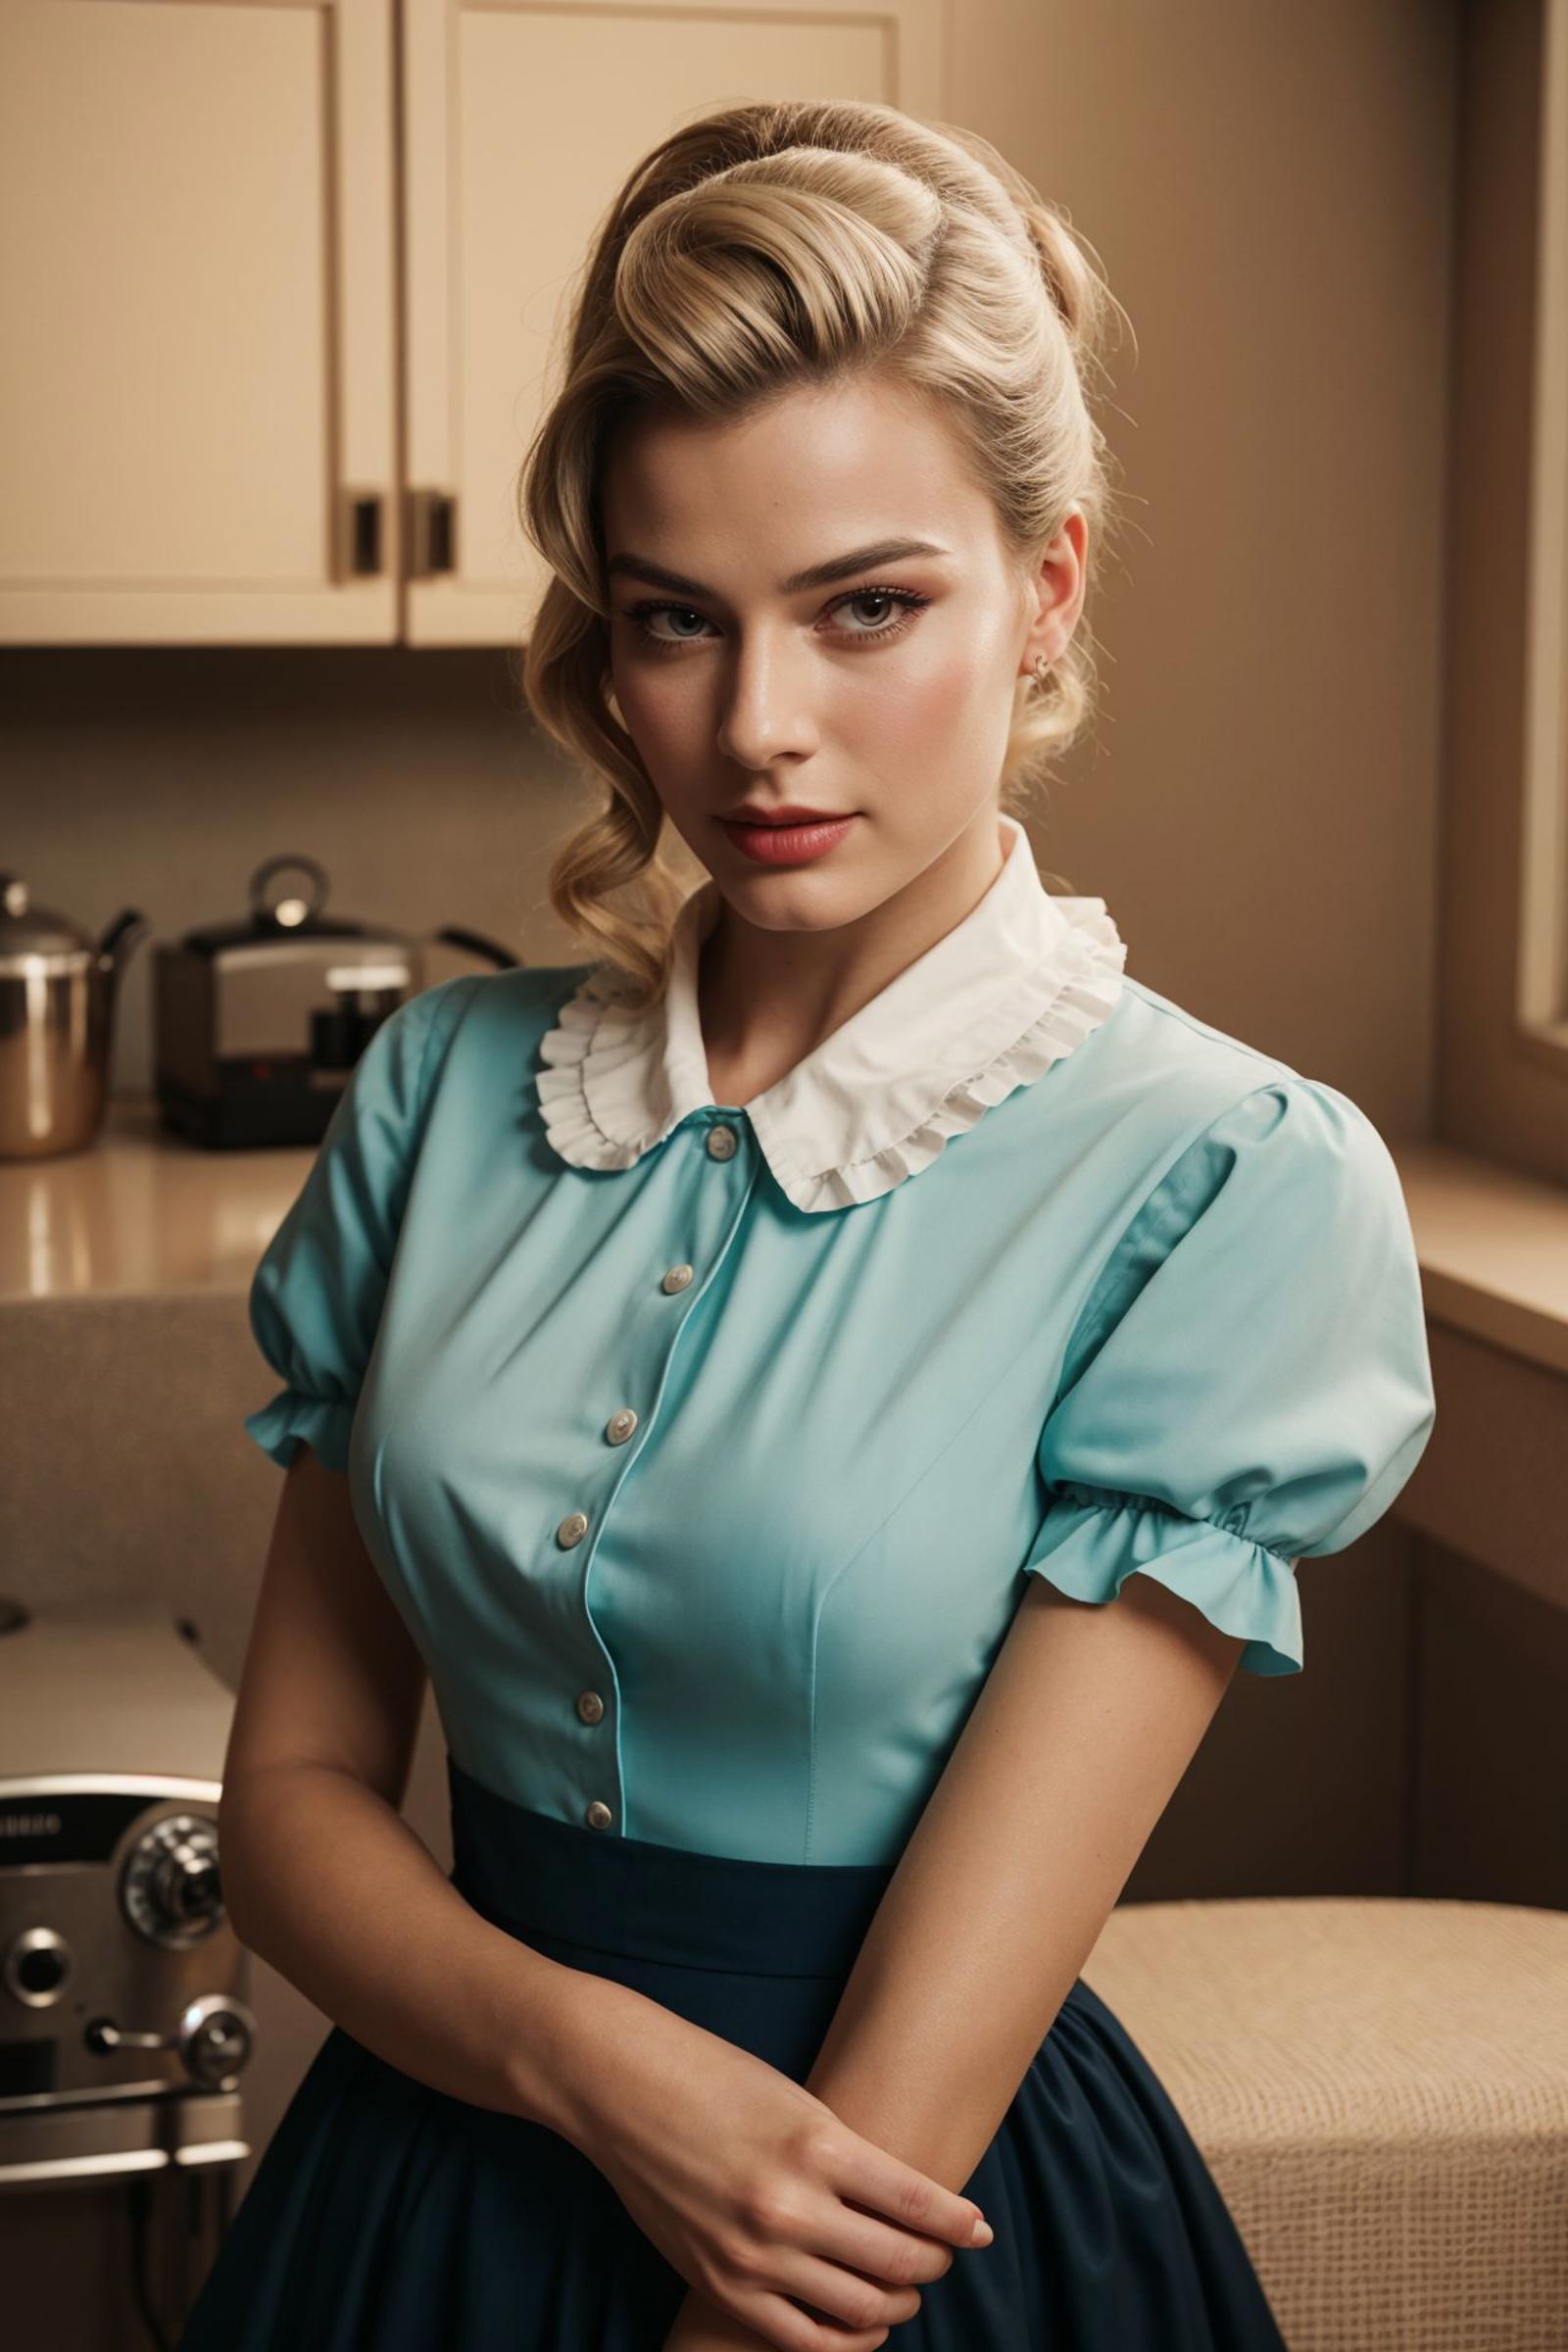 Margot Robbie – Actress image by tr4egg935